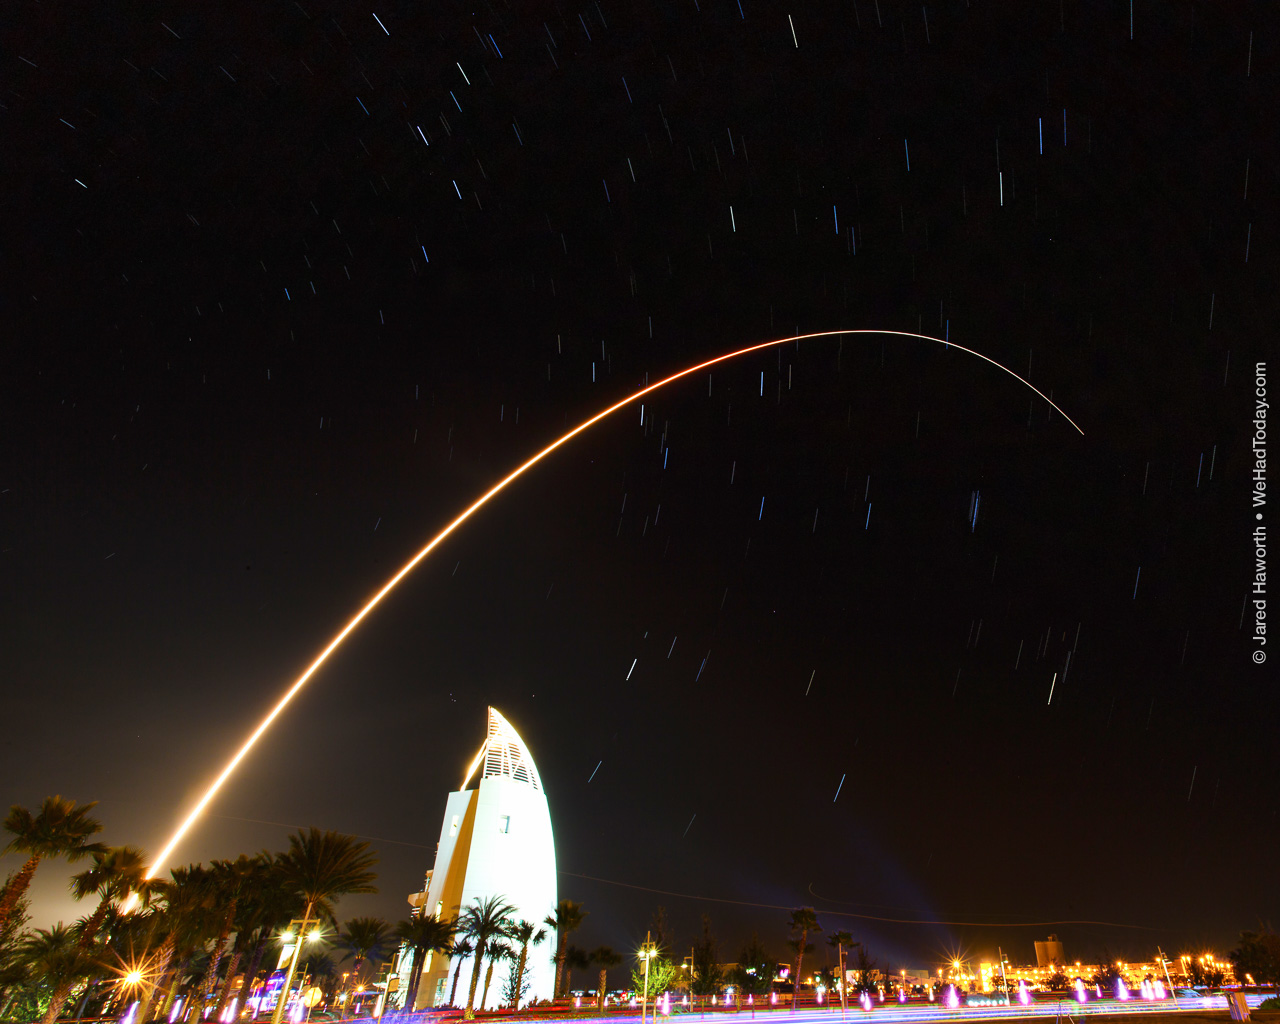 This 11 minute composite exposure depicts the flight of ULA's Delta IV Medium+ (5,4) rocket carrying WGS-8 to orbit.